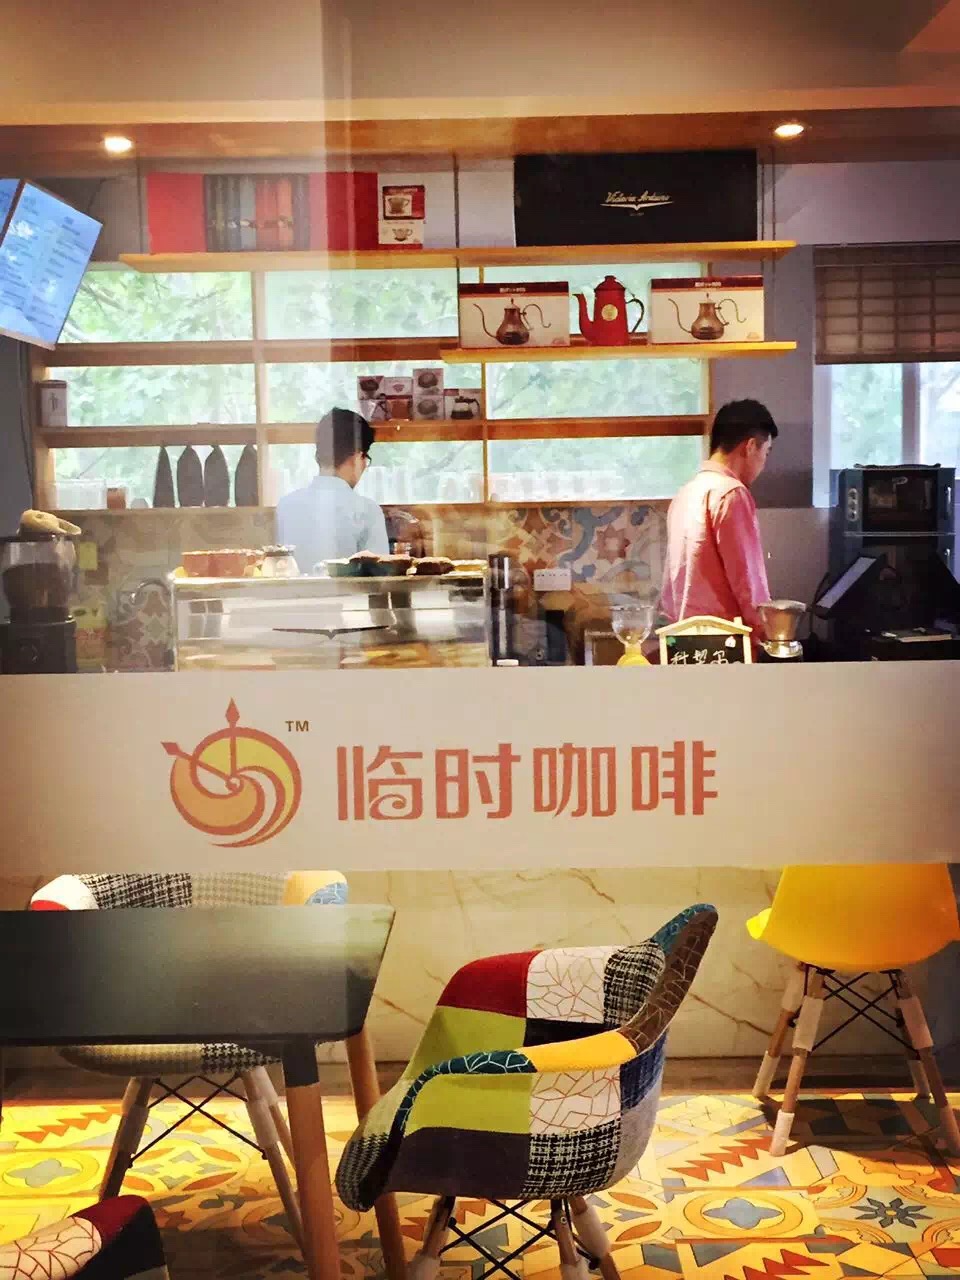 Luoyang Cafe recommends temporary Cafe